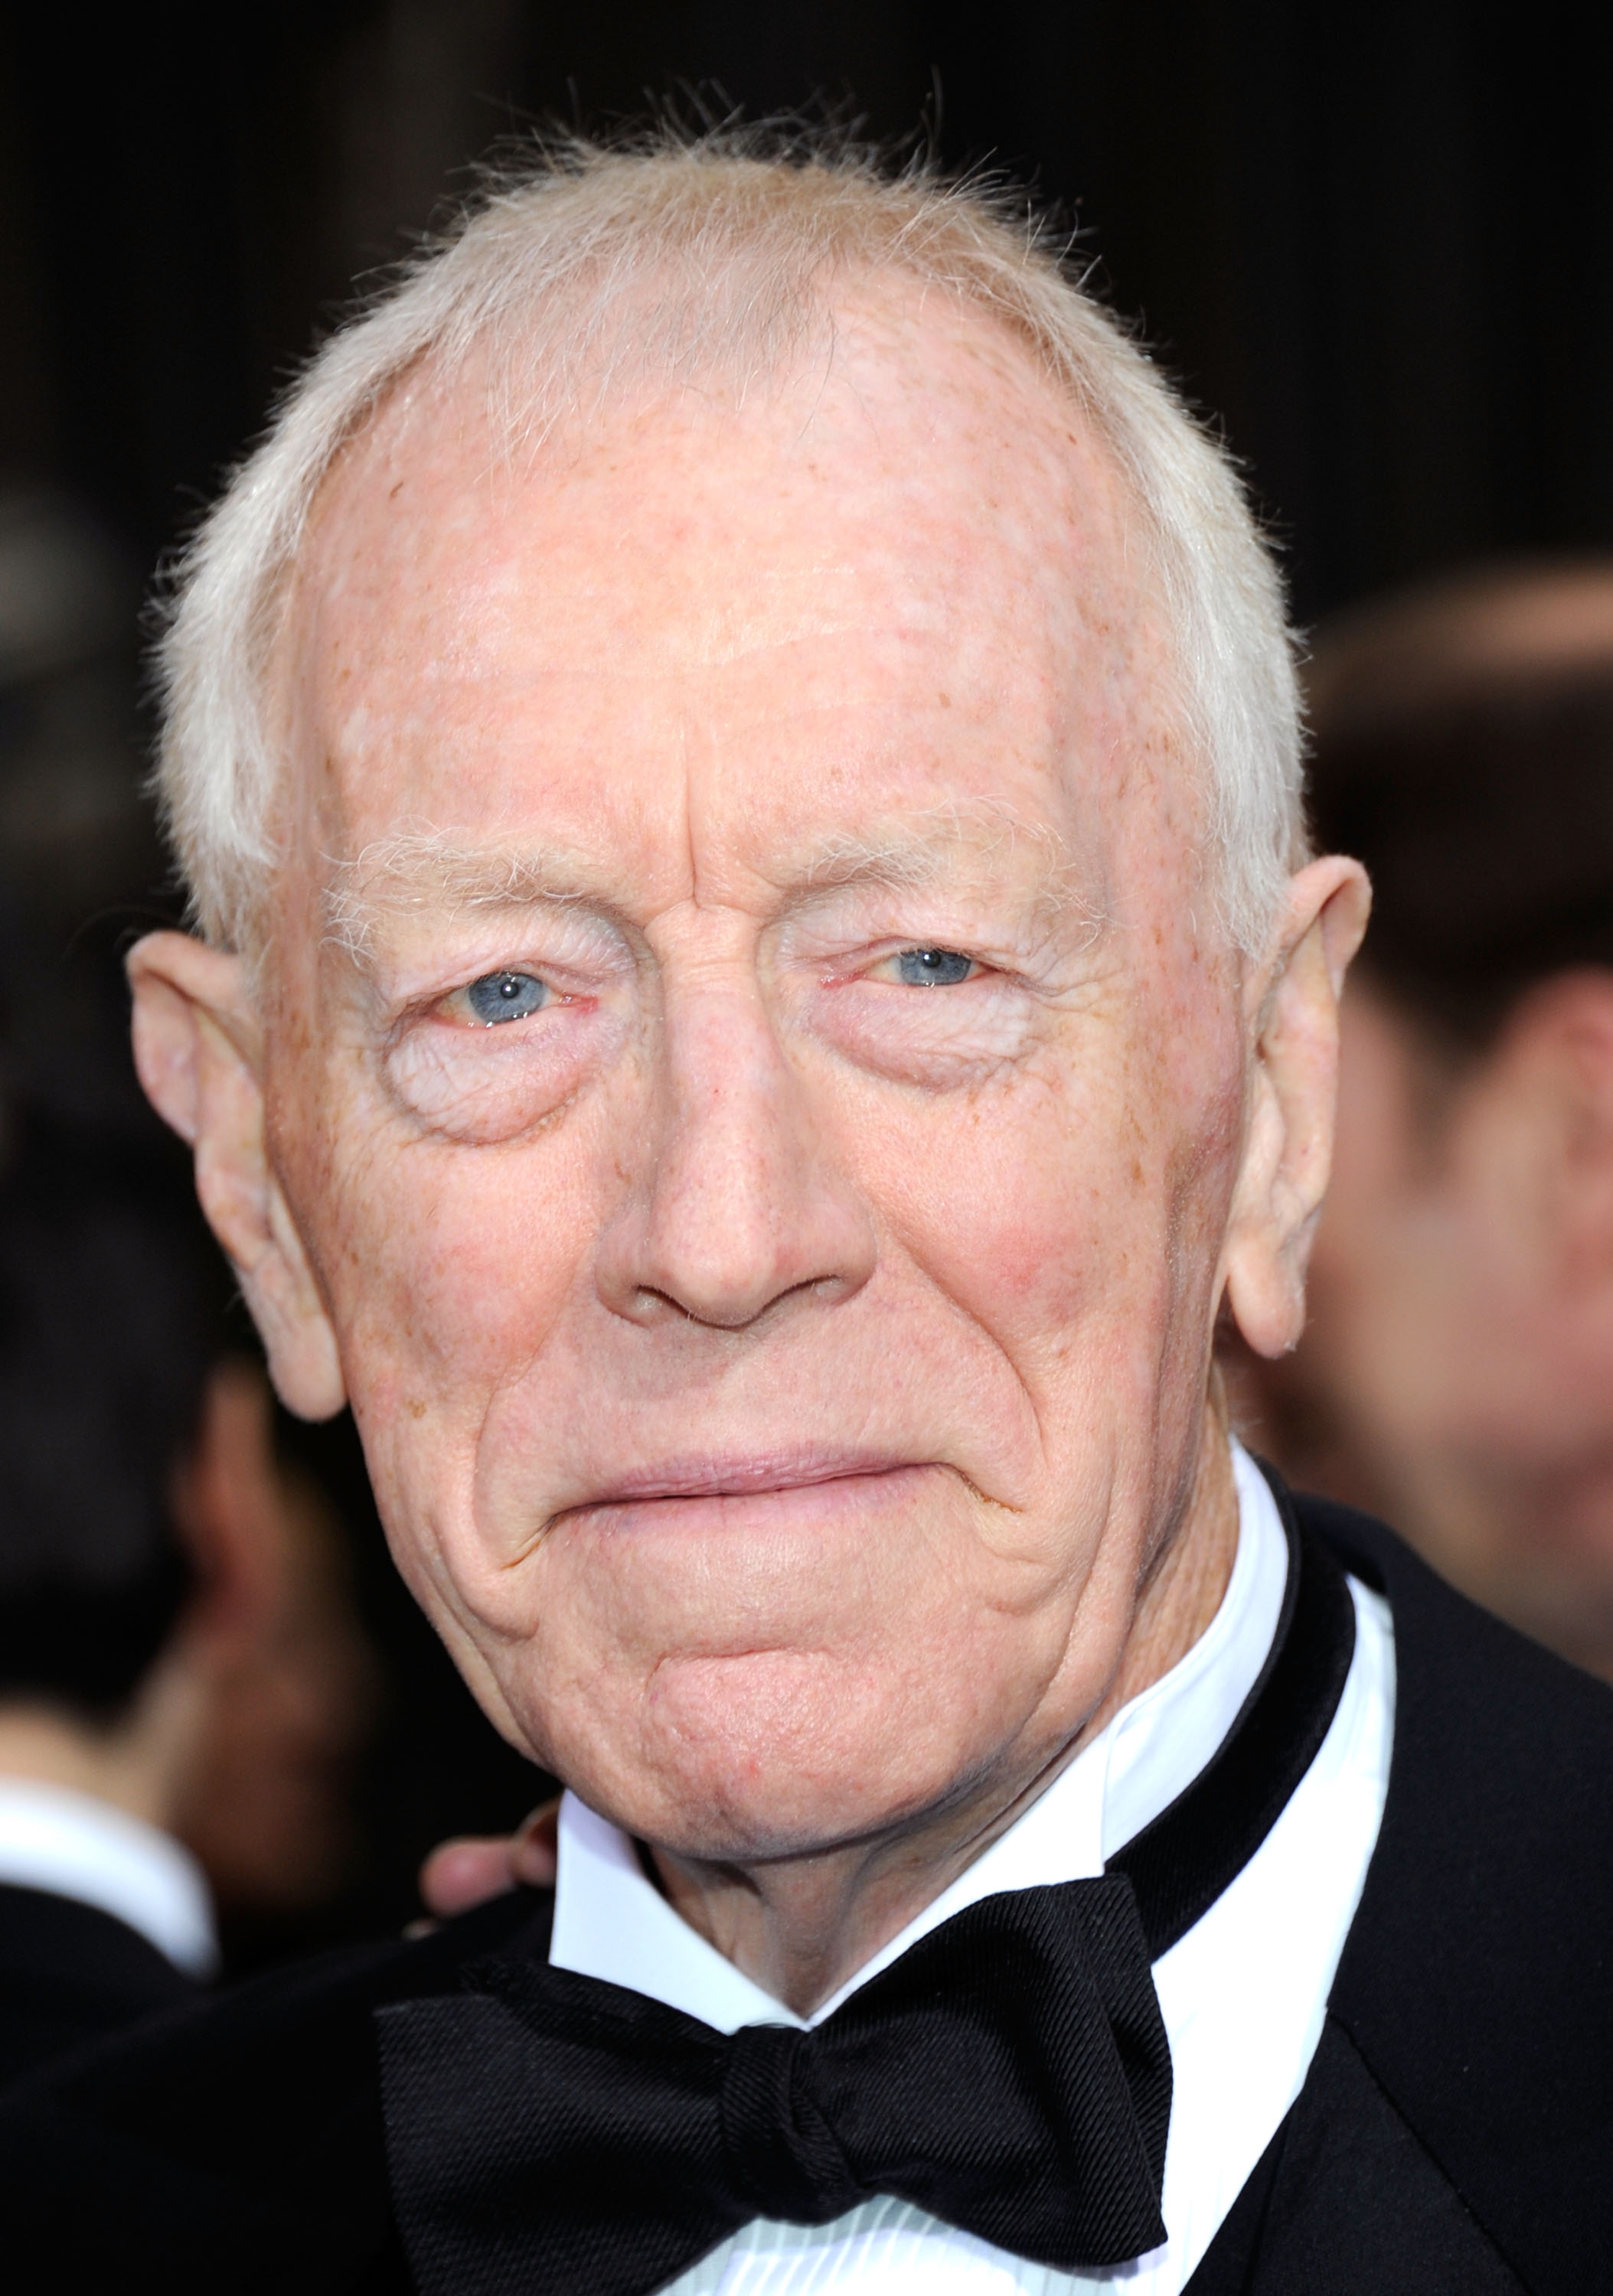 Max von Sydow
                              The veteran Swedish actor has played countless roles over the years including that of Ming the Merciless in the 1980 rendition of Flash Gordon and the voice of Vigo the Carpathian in Ghostbusters II